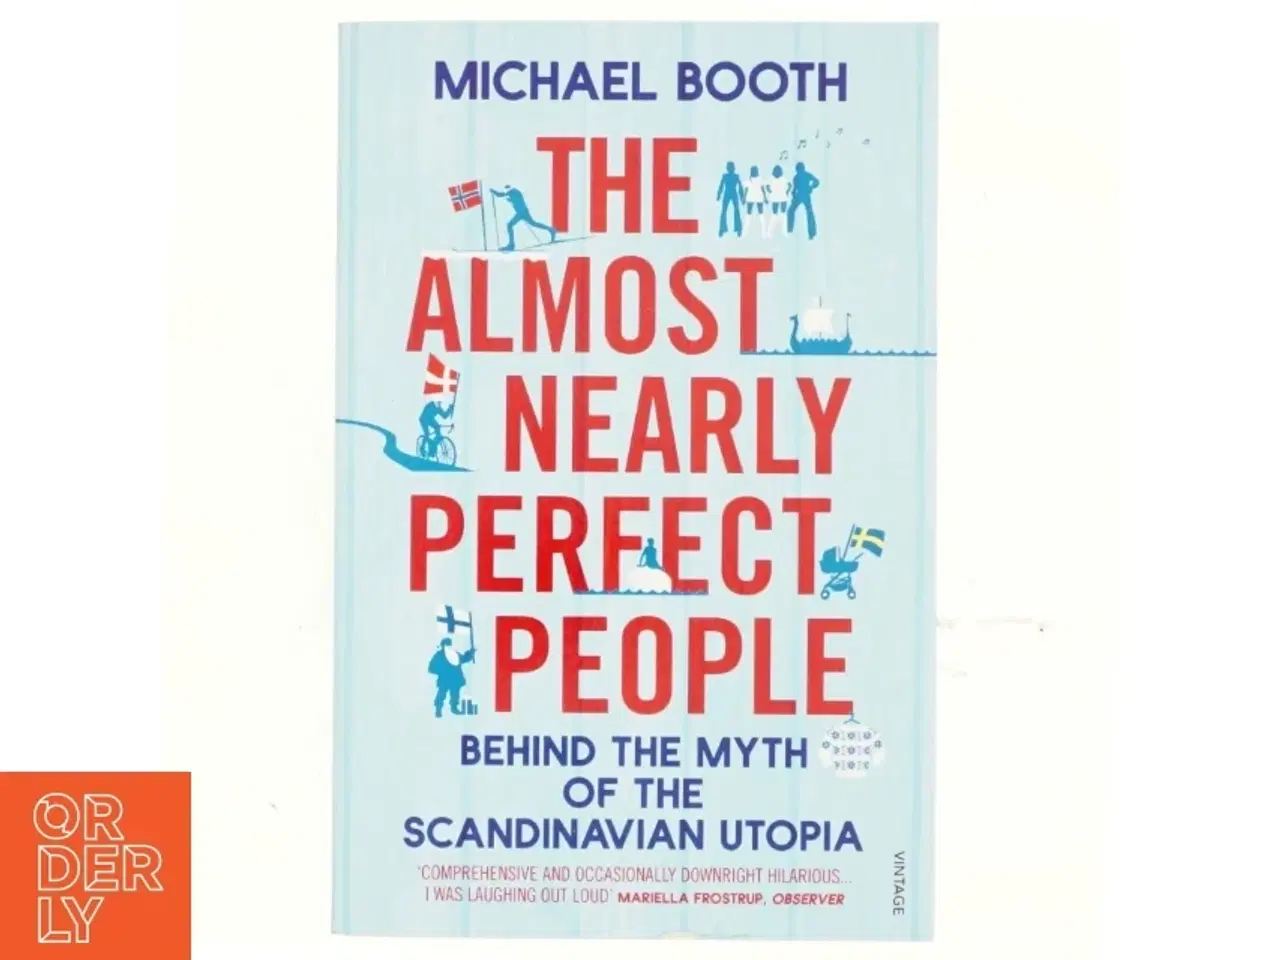 Billede 1 - The almost nearly perfect people : behind the myth of the scandinavian utopia af Michael Booth (Bog)